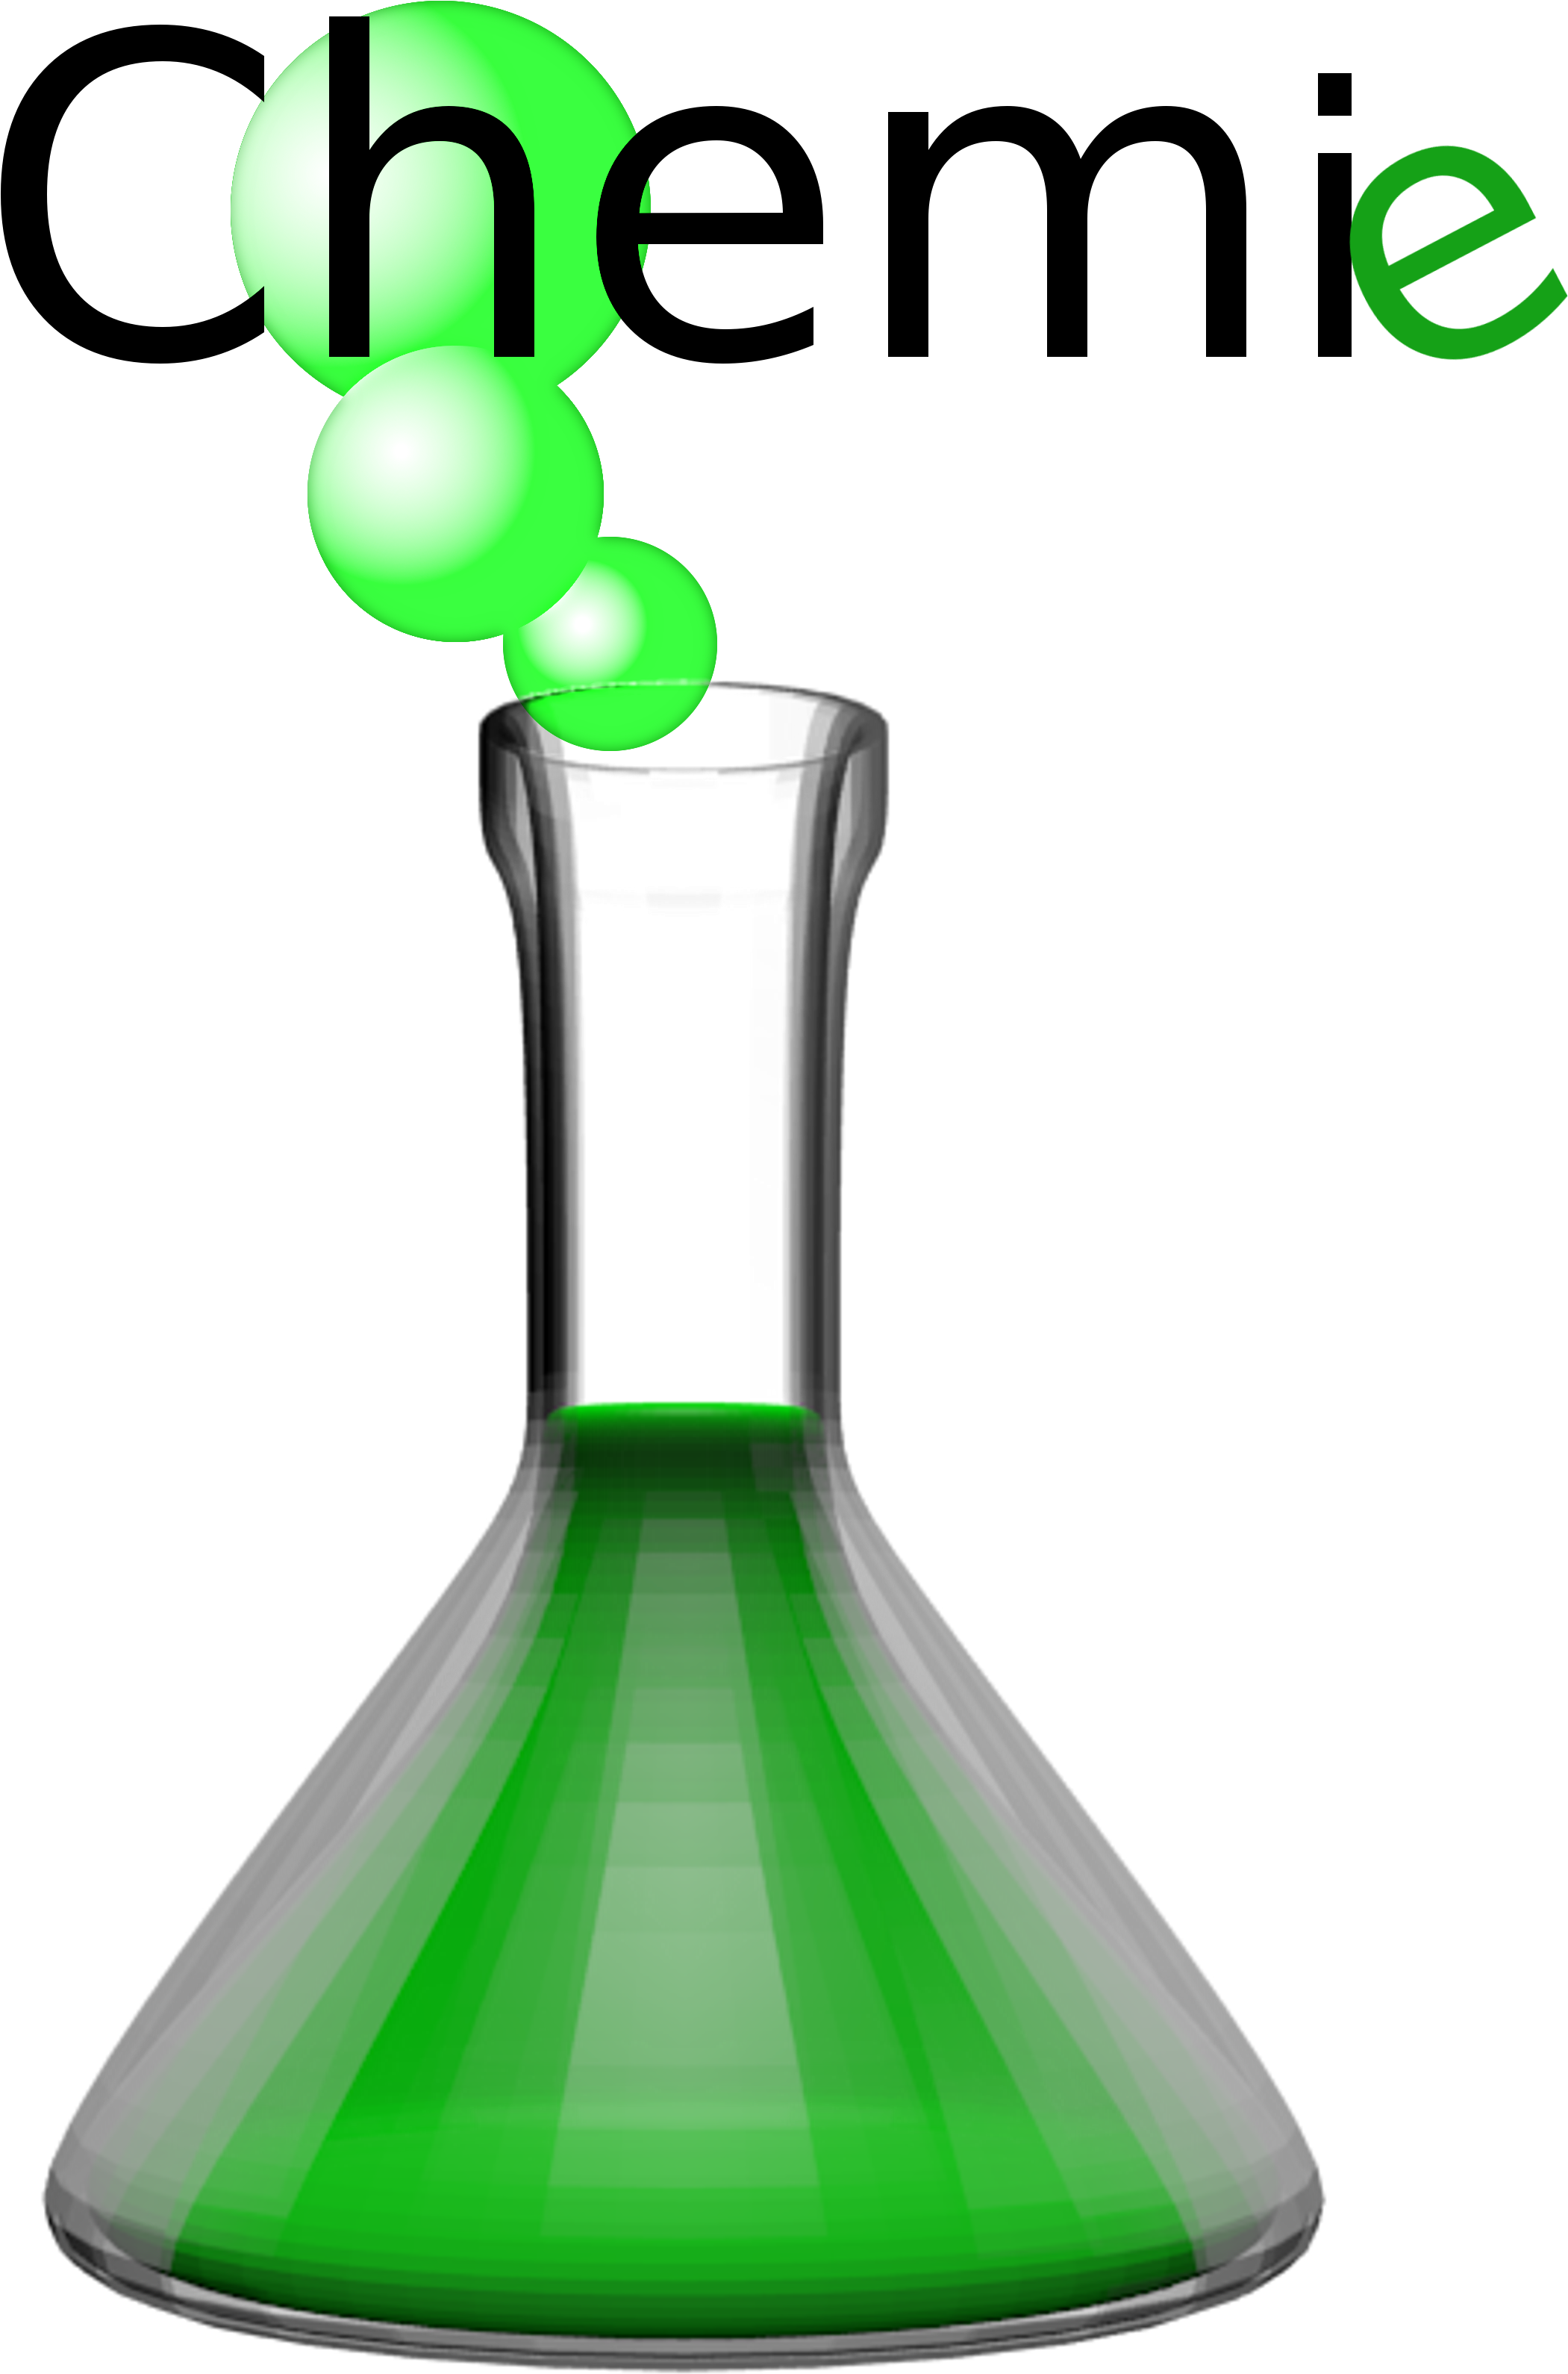 Green Chemical Reaction Erlenmeyer Flask